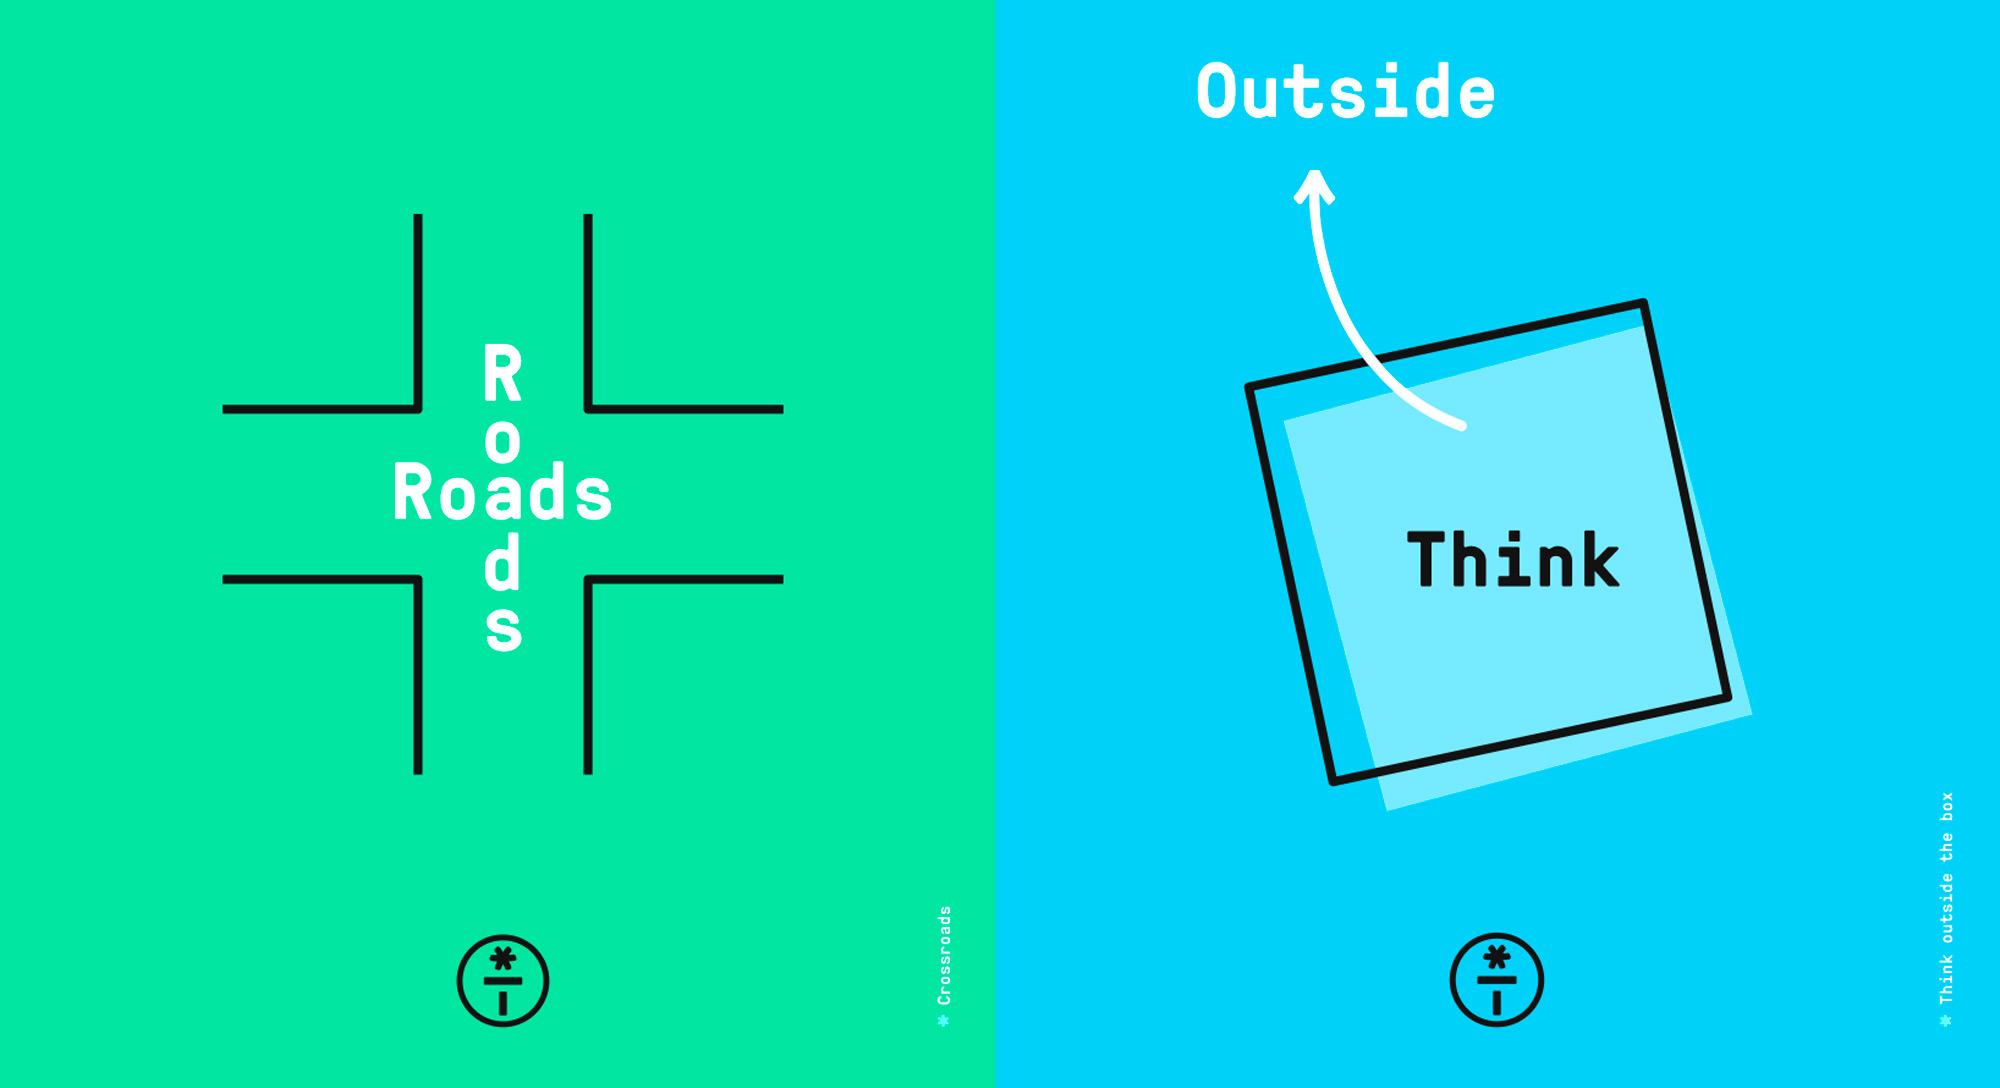 Tlab Iconography, visually representing 'crossroads' and 'Thinking outside the square'